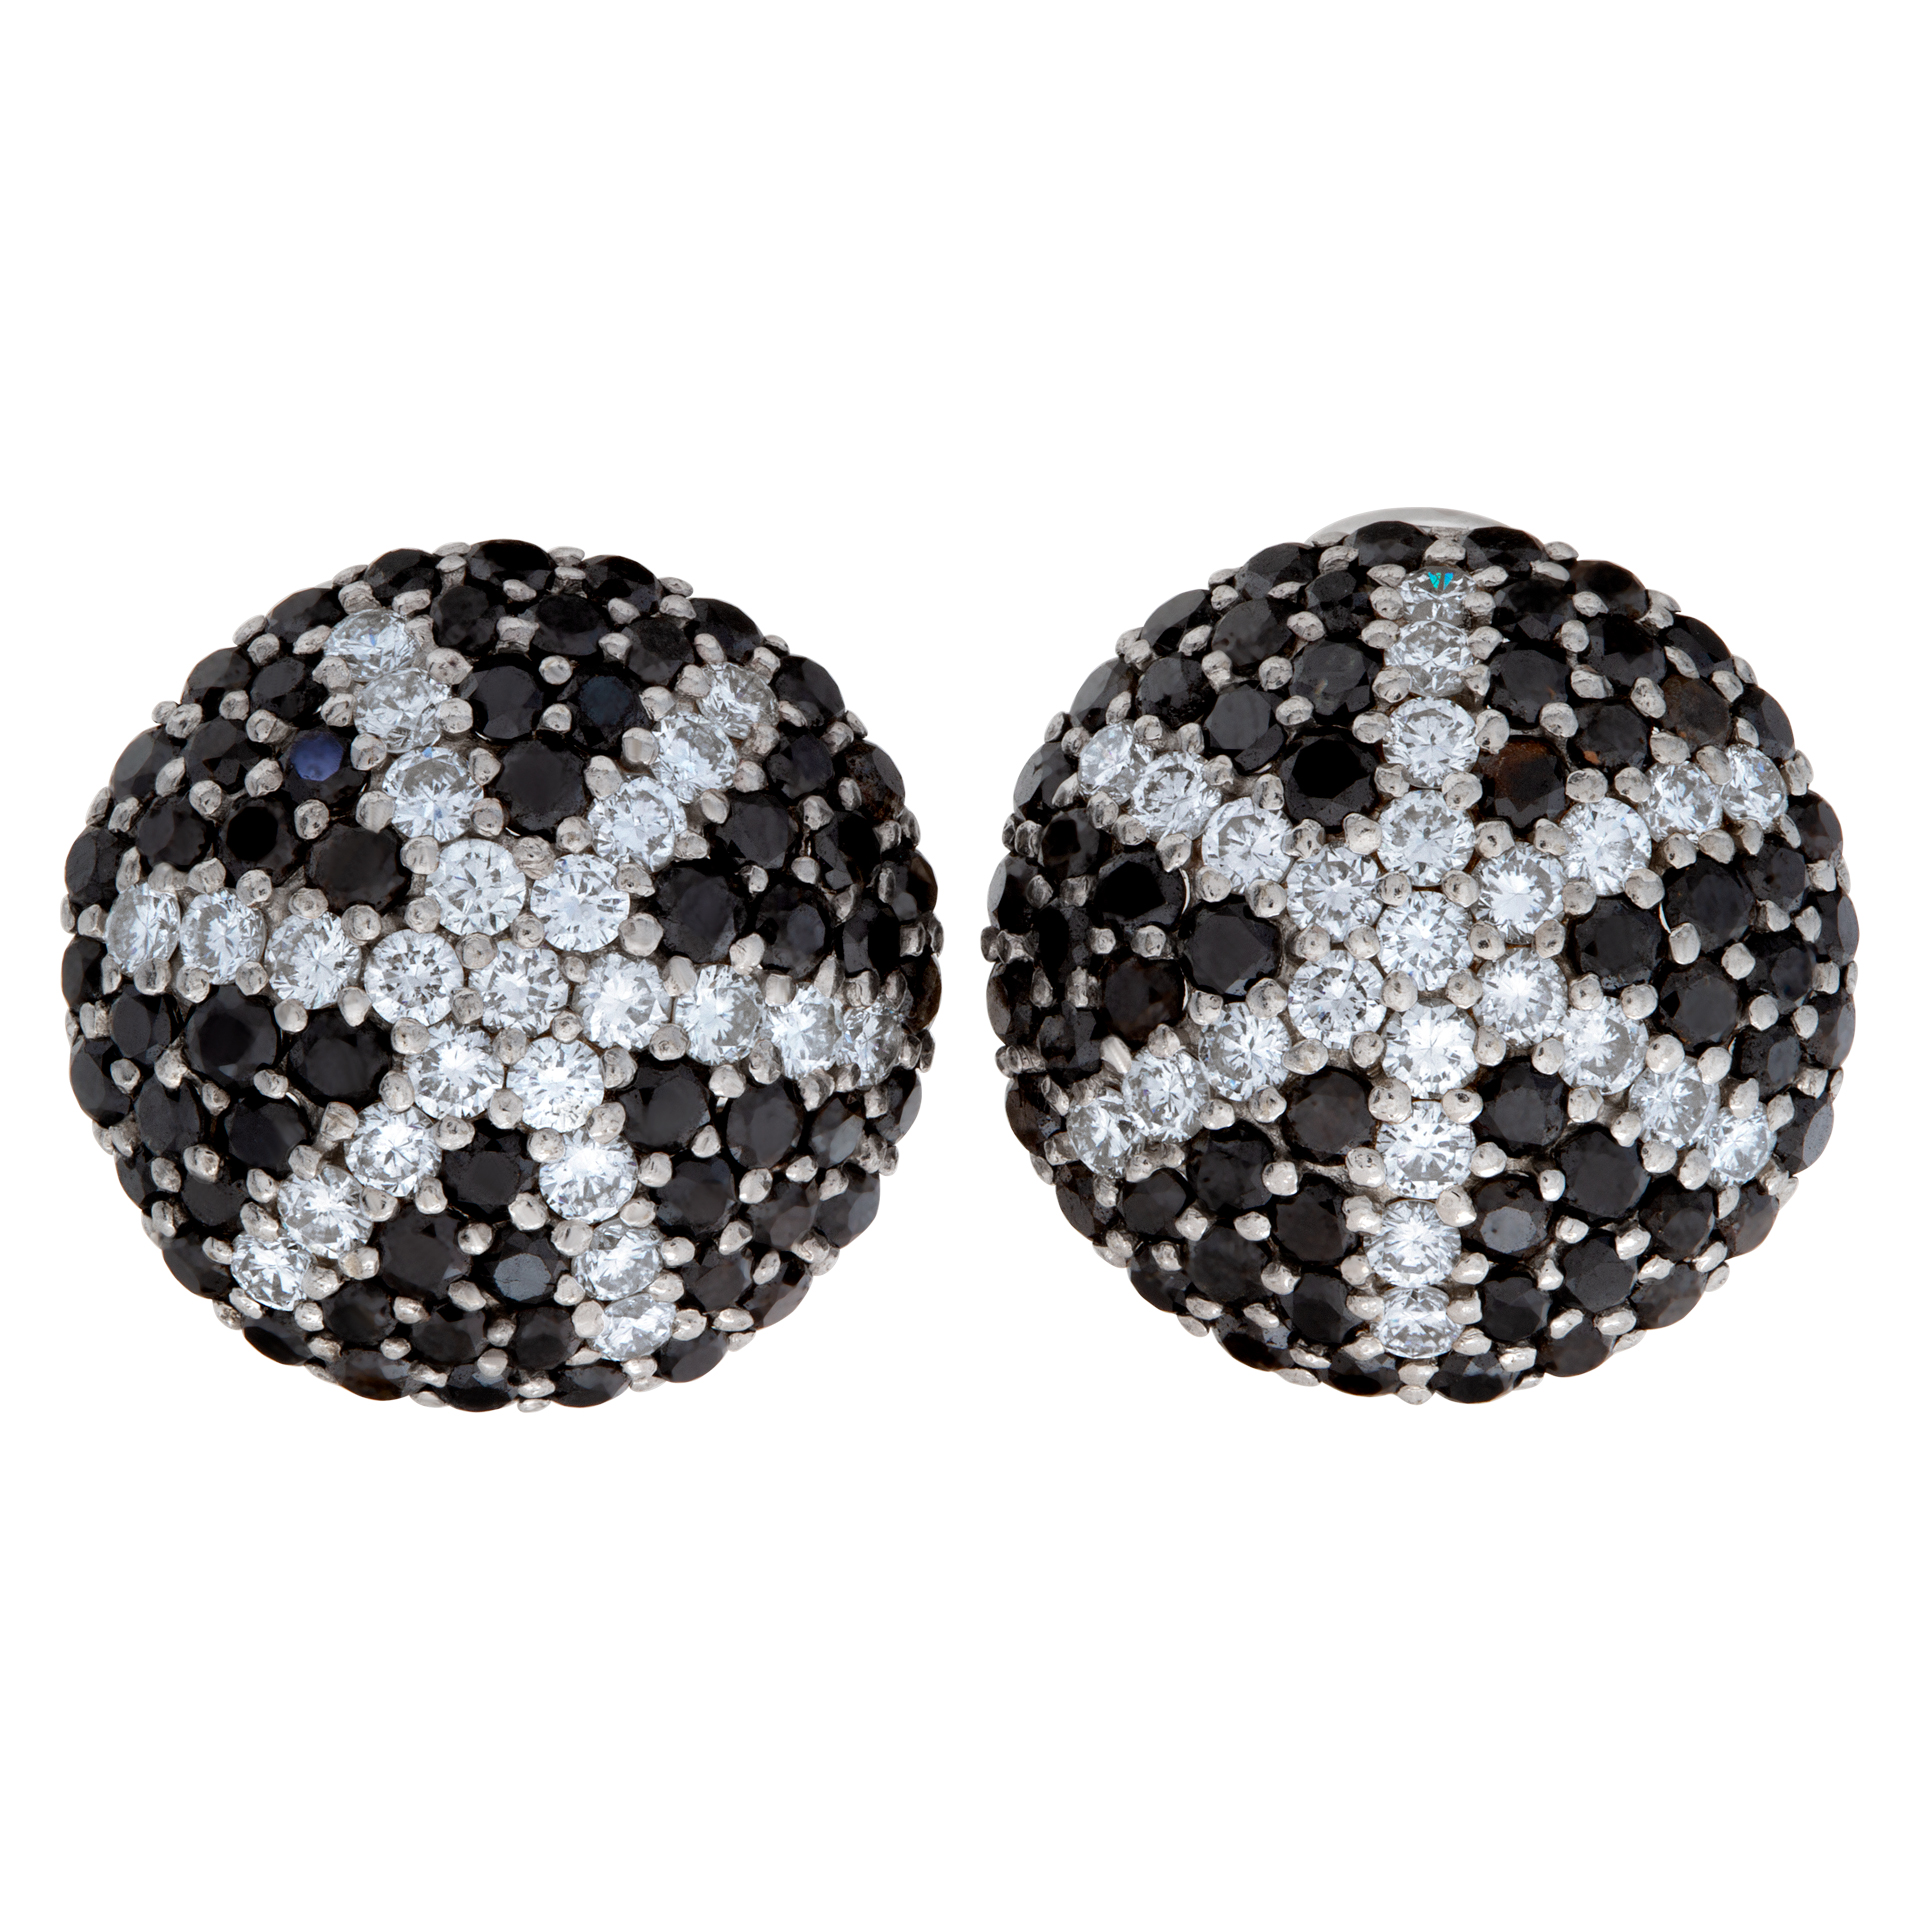 Diamond and black hematite earrings with approximately 1.25 carat in white diamond set 18k white gold